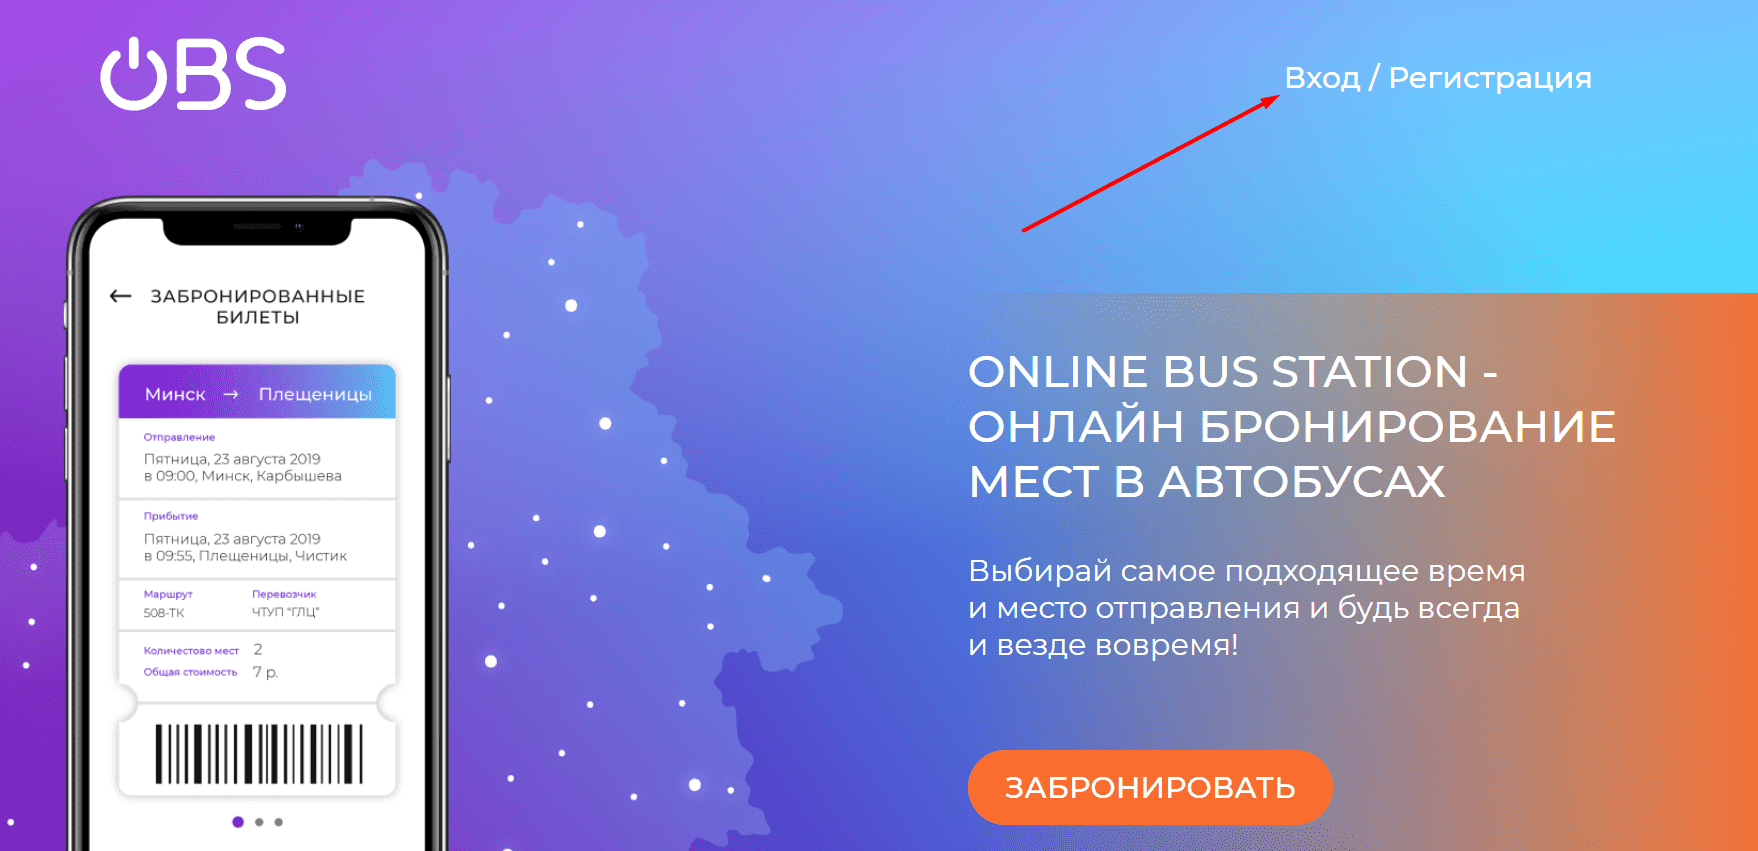 Online Bus Station (obs.by)